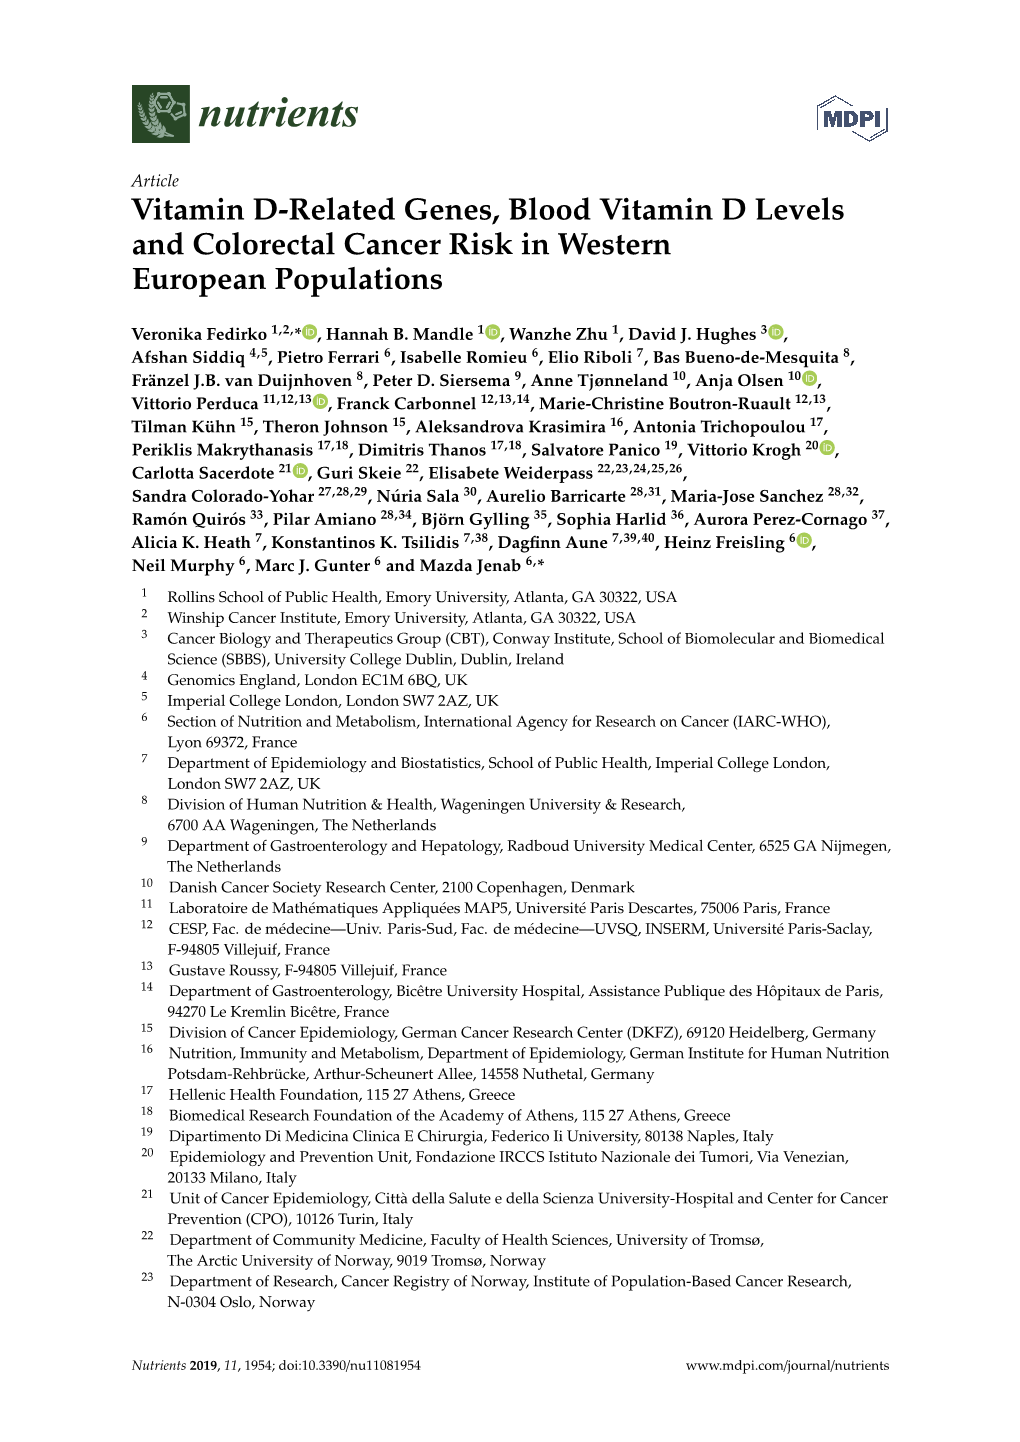 Vitamin D-Related Genes, Blood Vitamin D Levels and Colorectal Cancer Risk in Western European Populations